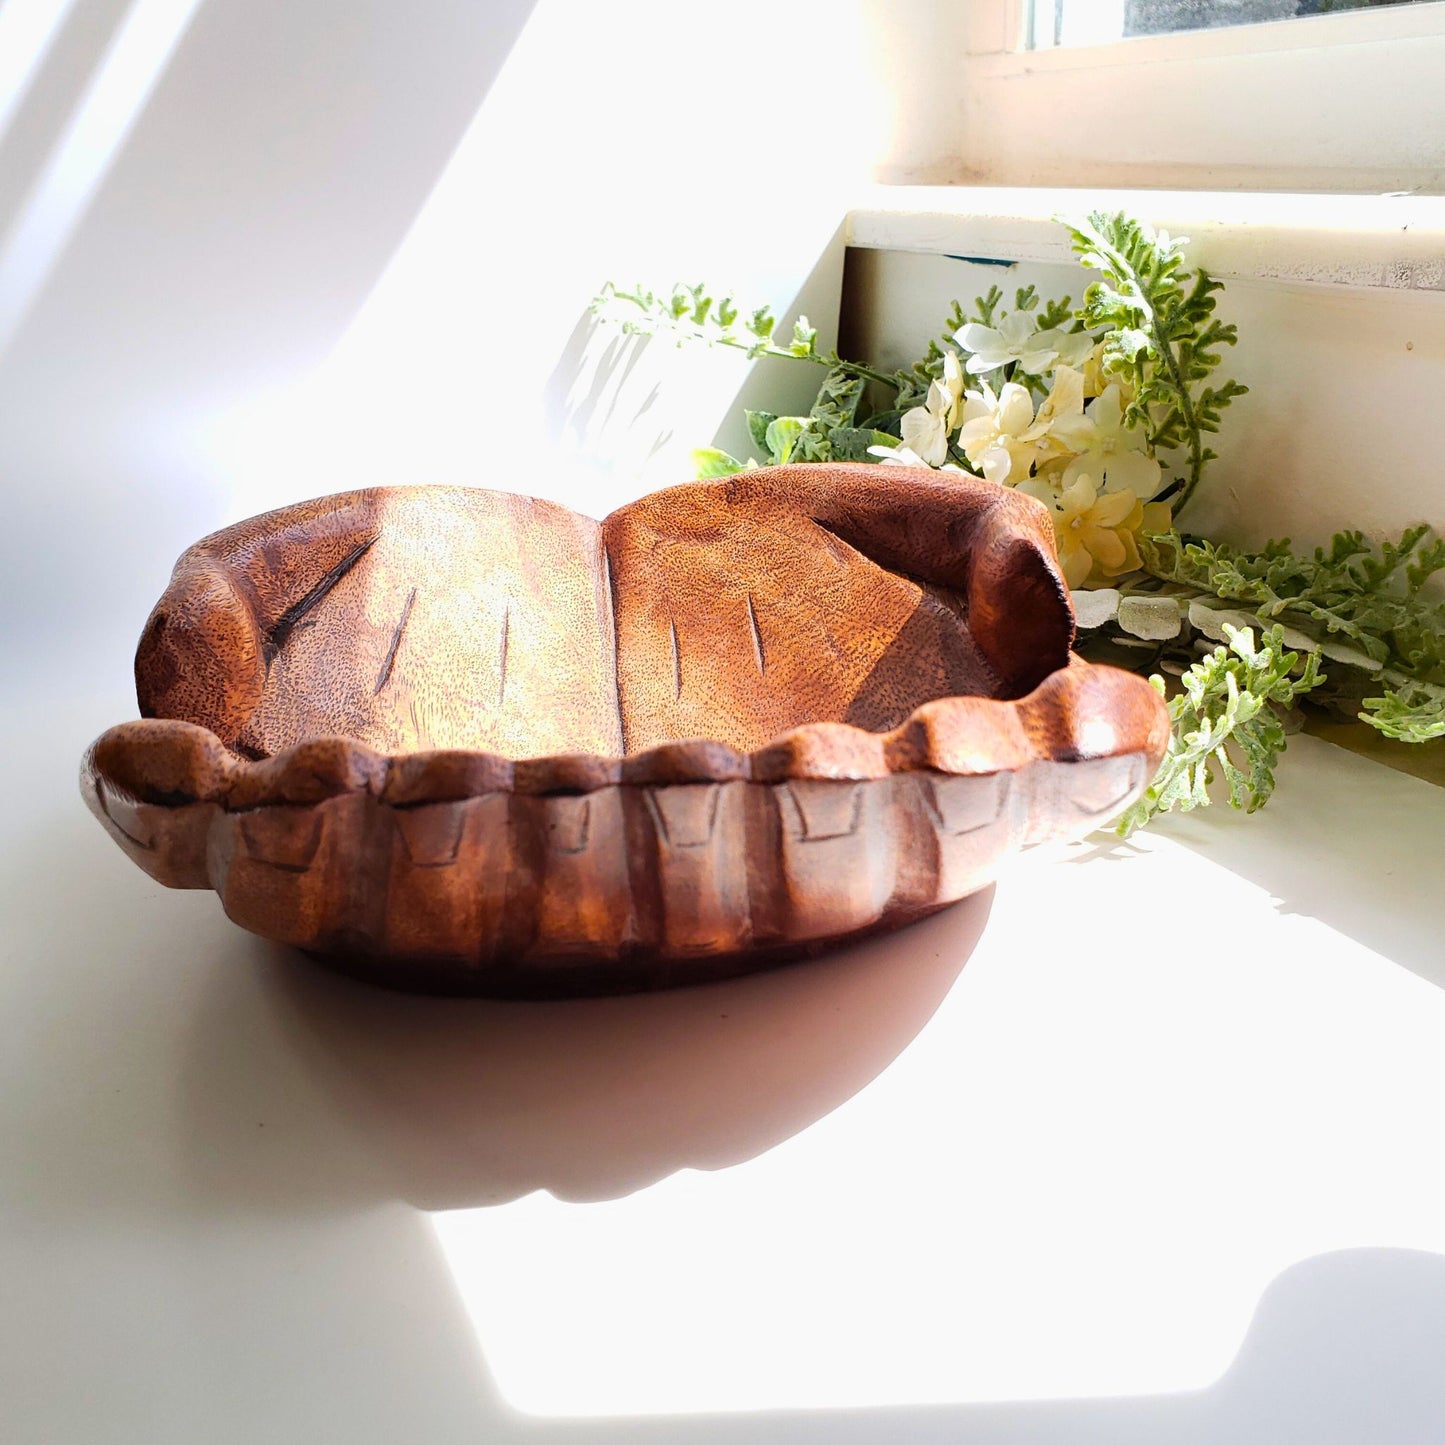 Artisanal Wooden Bowl with Open Hands Design